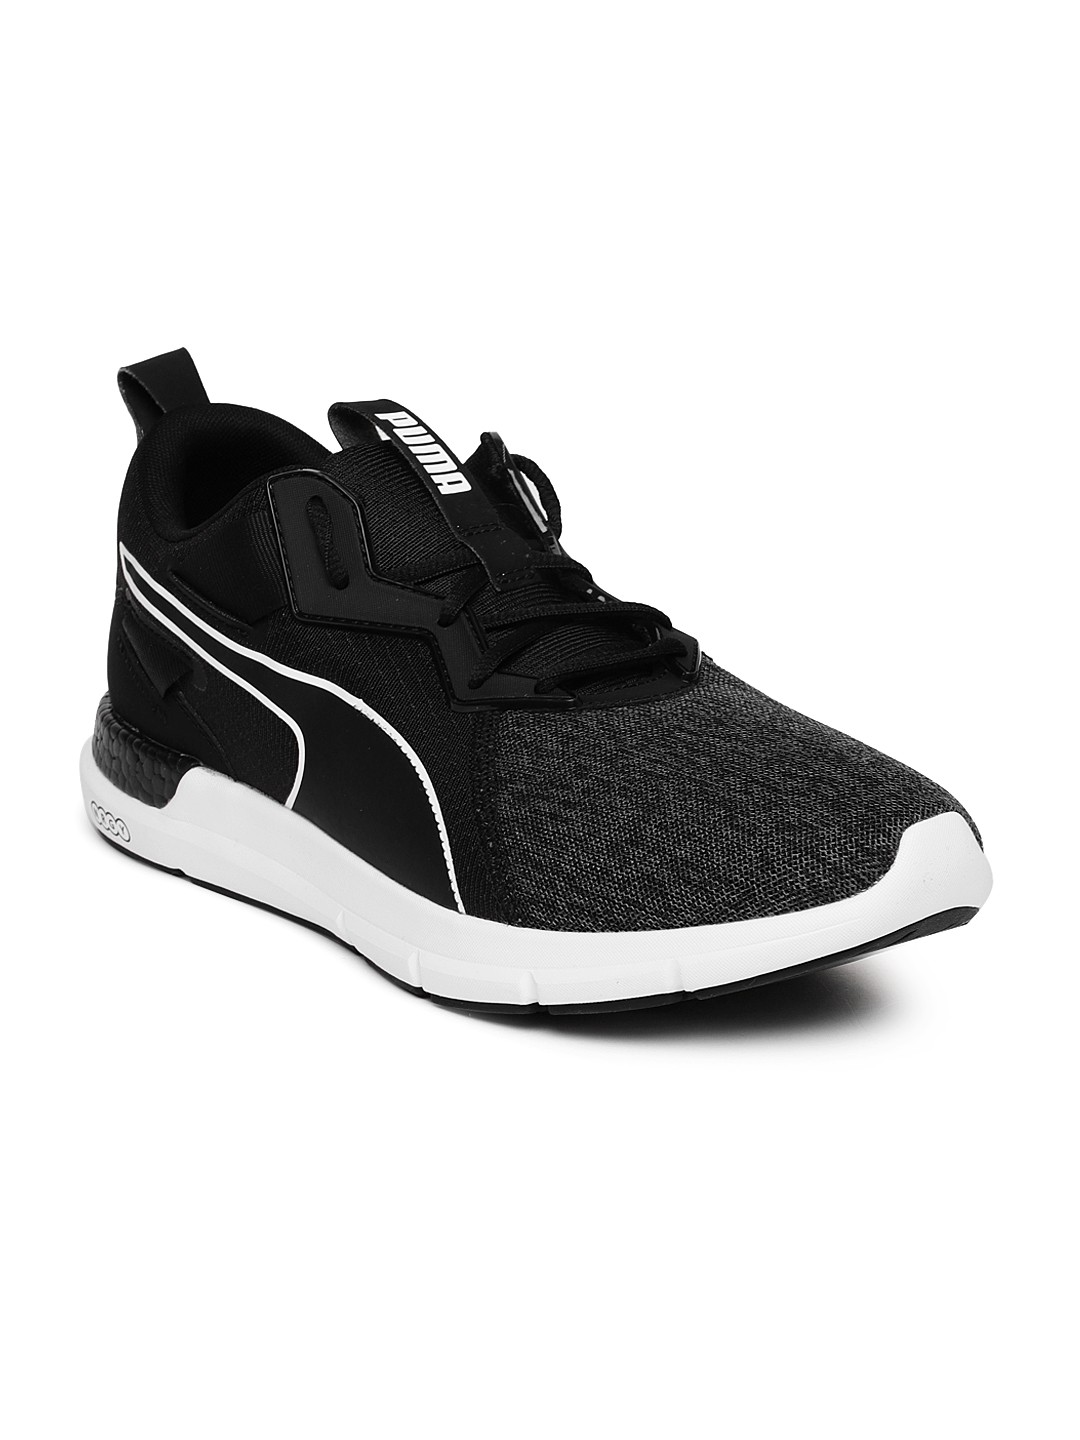 Puma Textured Lace up Sports Shoes 2021 - Buy @ Lowest